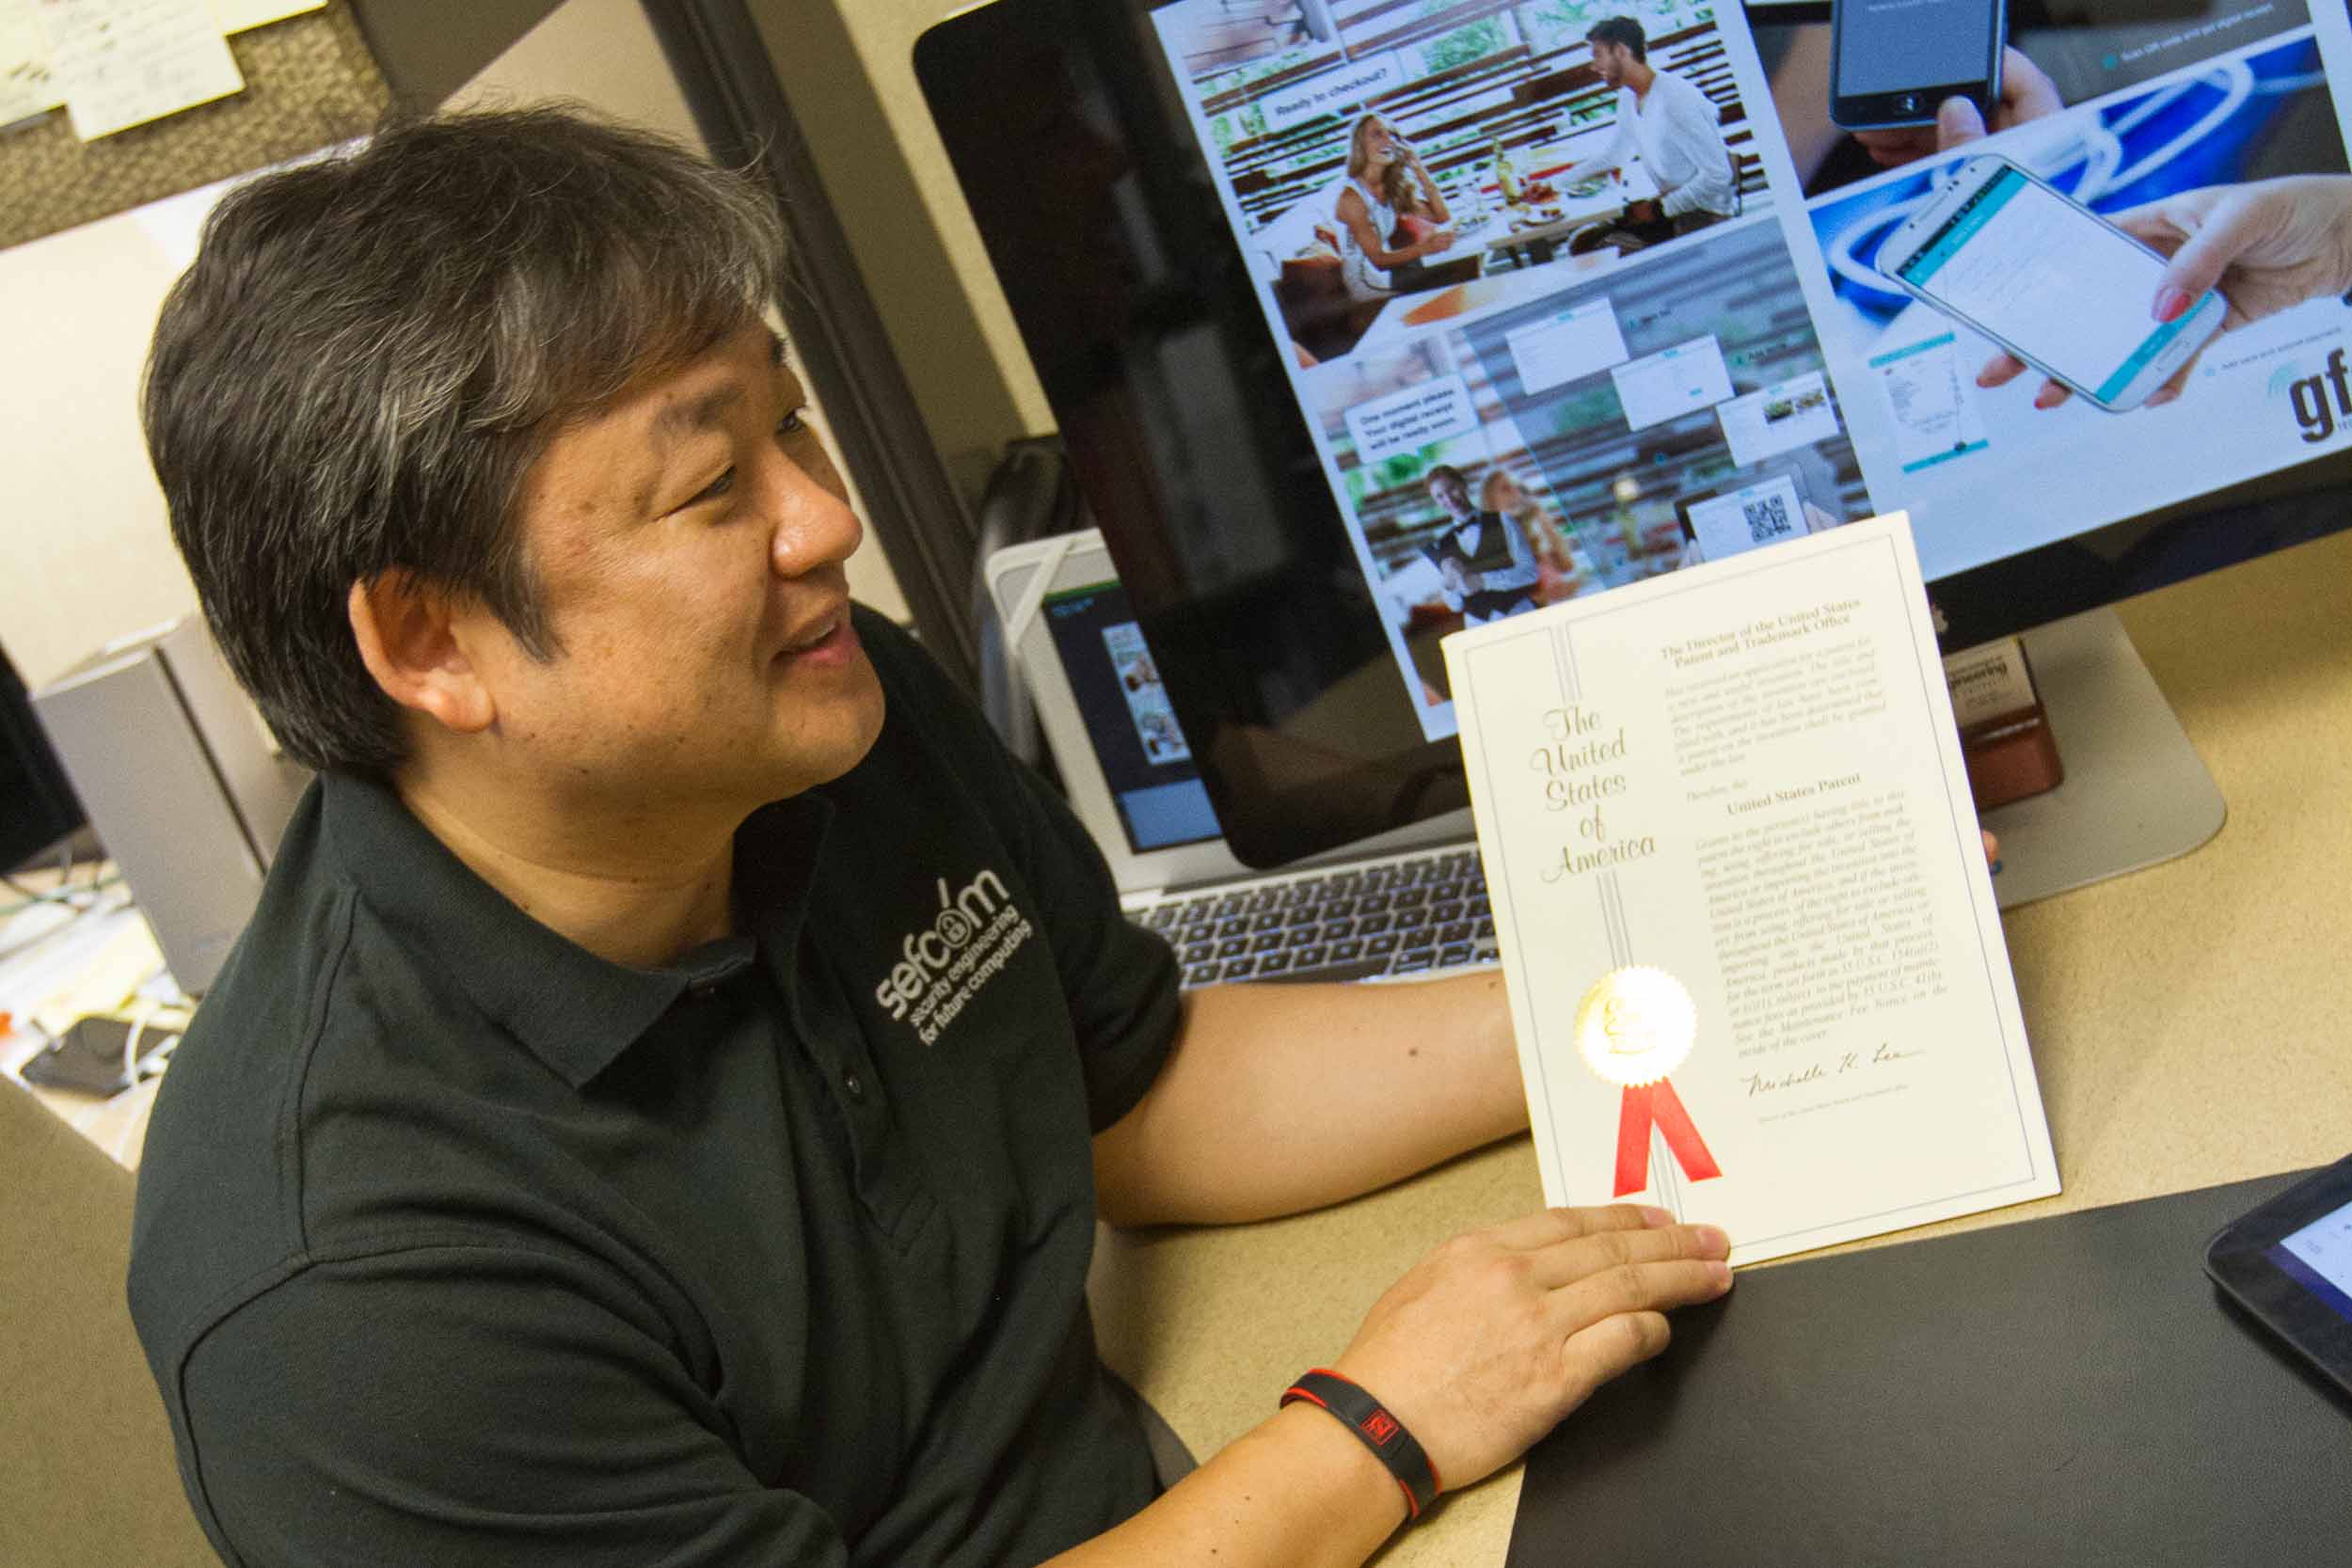 Gail-Joon Ahn sits at his desk, smiling, holding an award certificate in his hand.